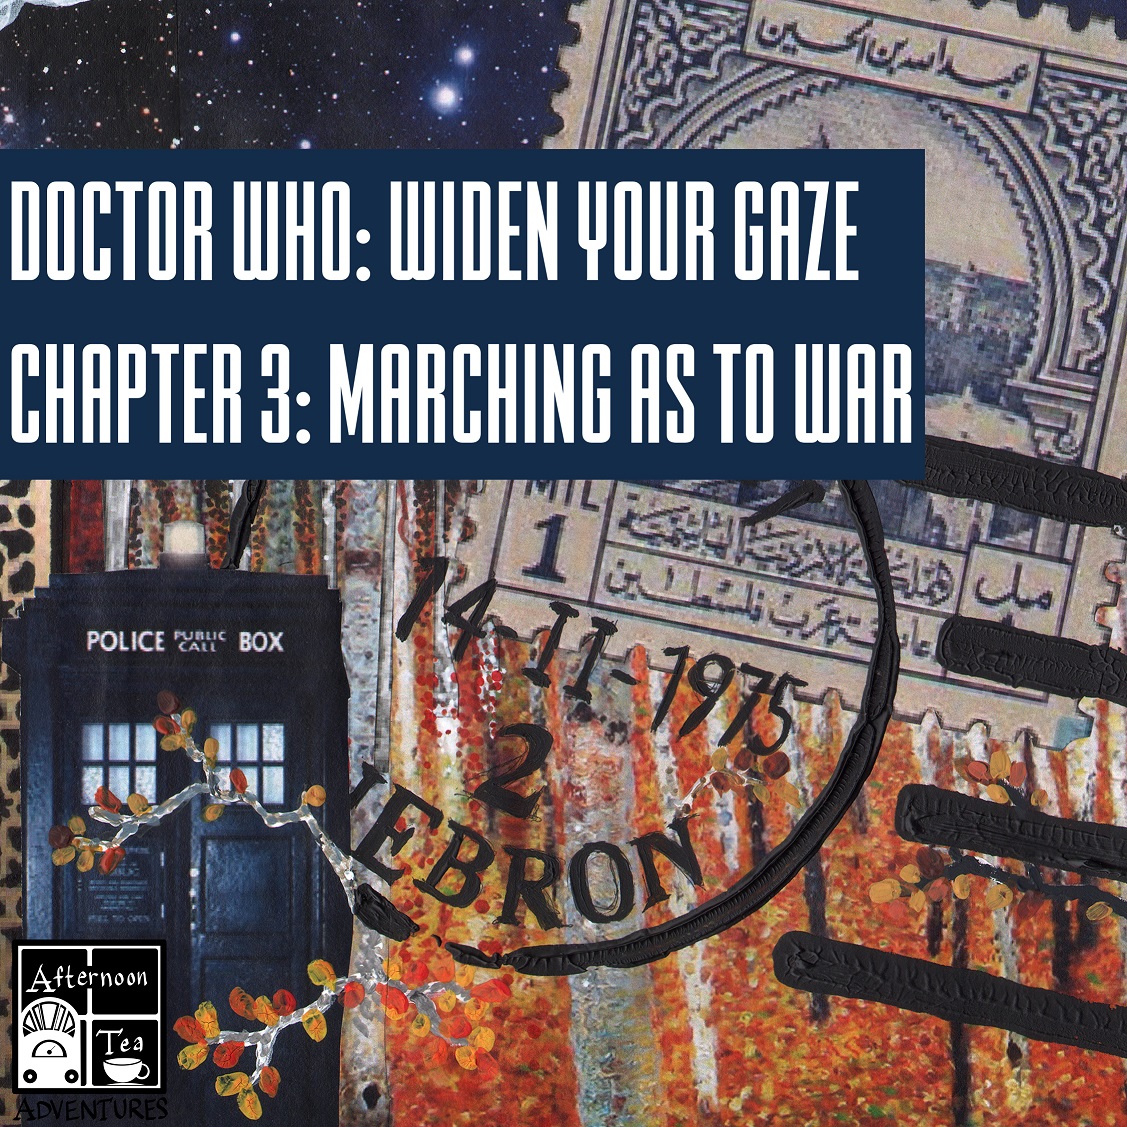 Doctor Who Series 1 Story 1: Widen Your Gaze: Chapter 3 - Marching As To War